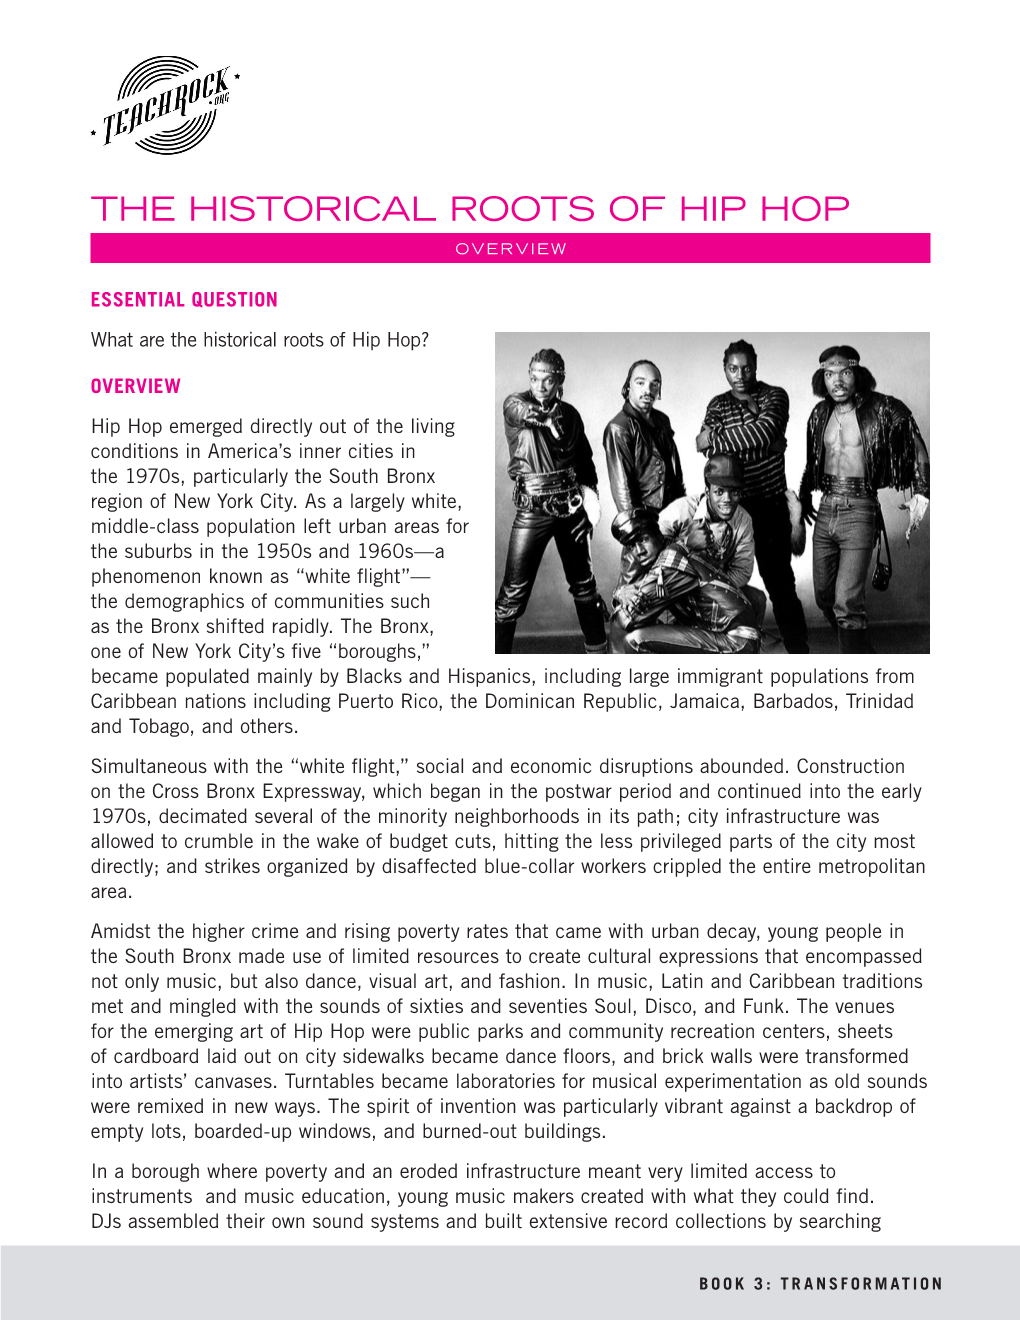 The Historical Roots of Hip Hop Overview